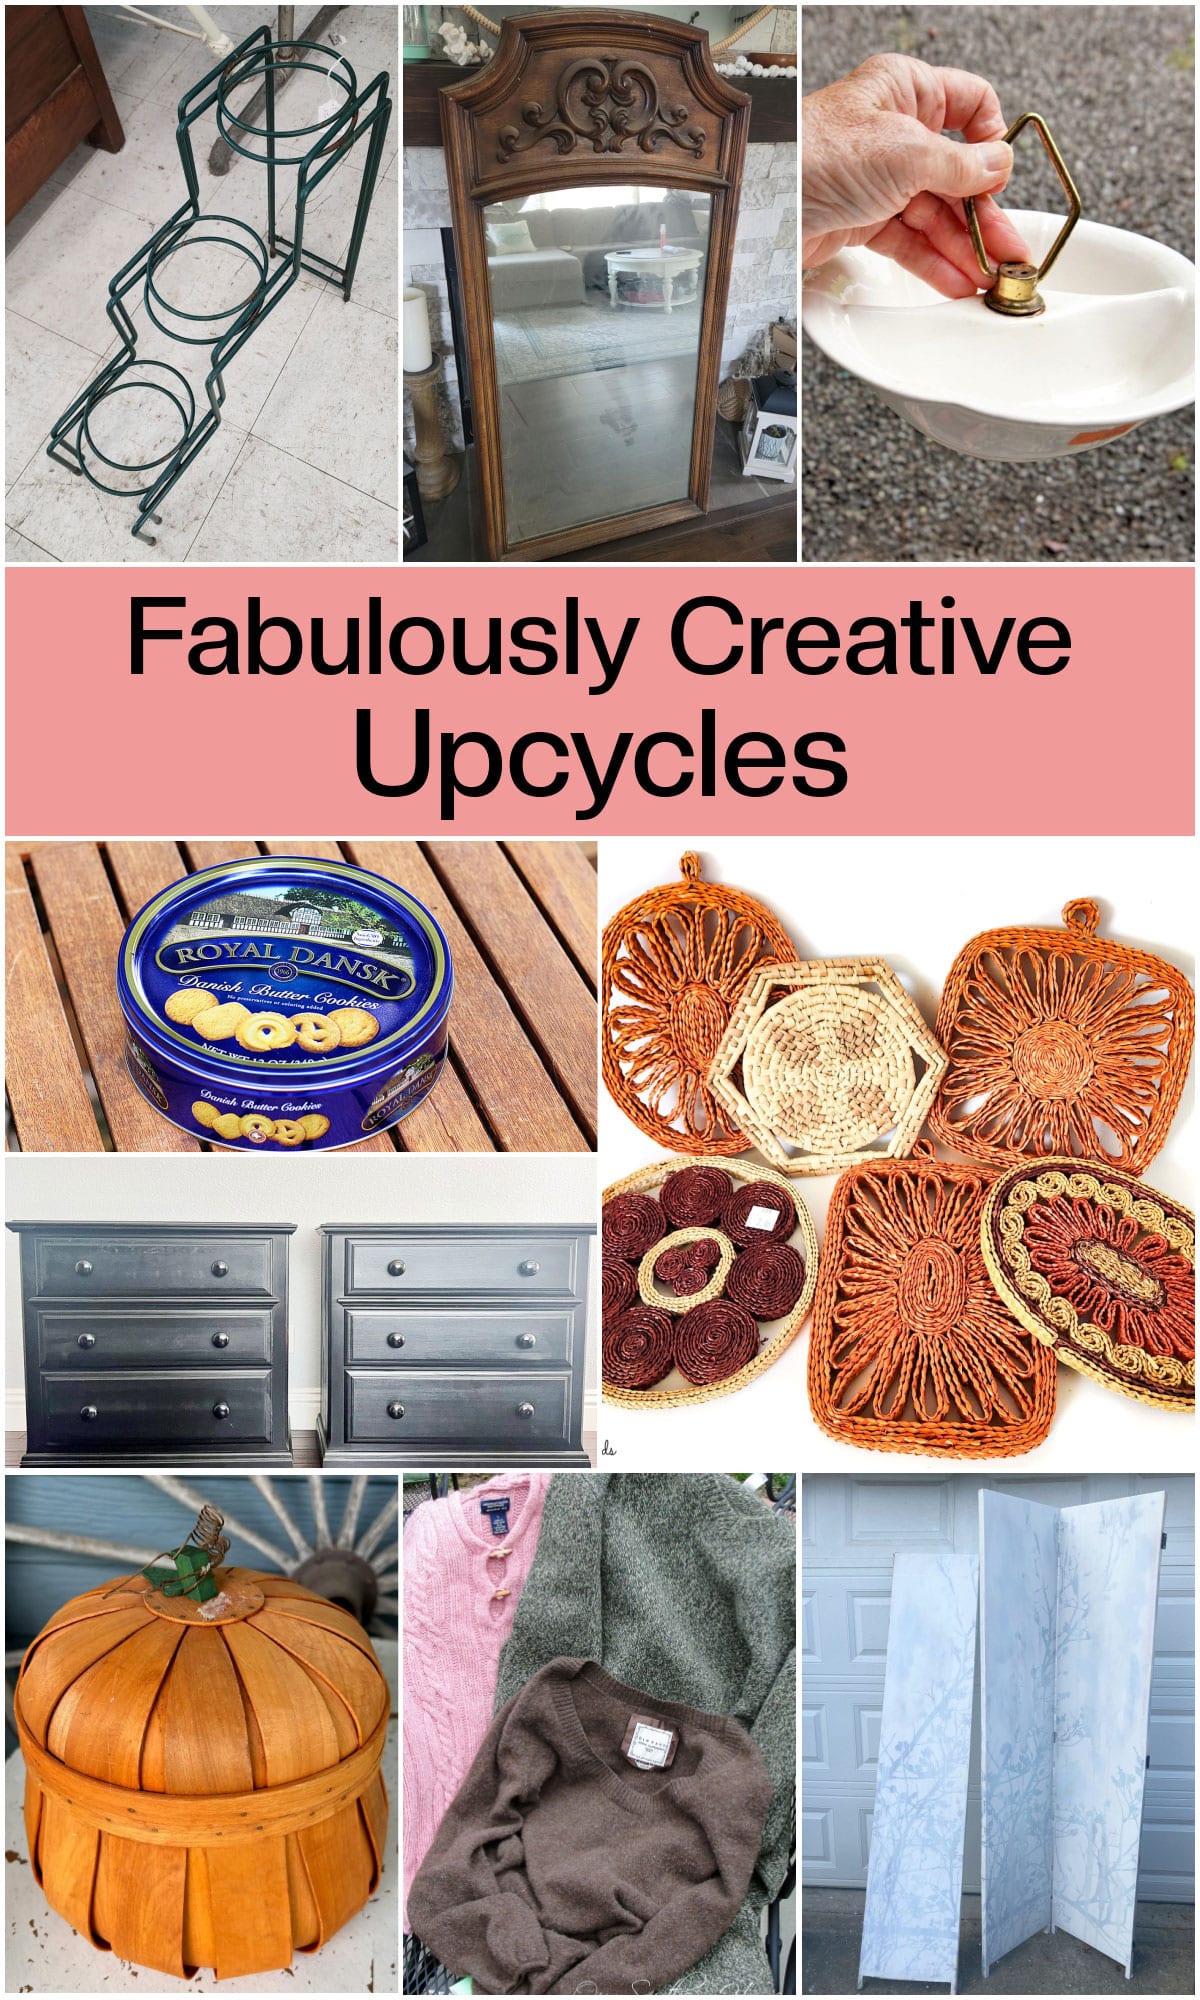 Creative upcycles including repurposing old sweaters, Royal Dansk butter cookie tins and thrift store pot trivets.